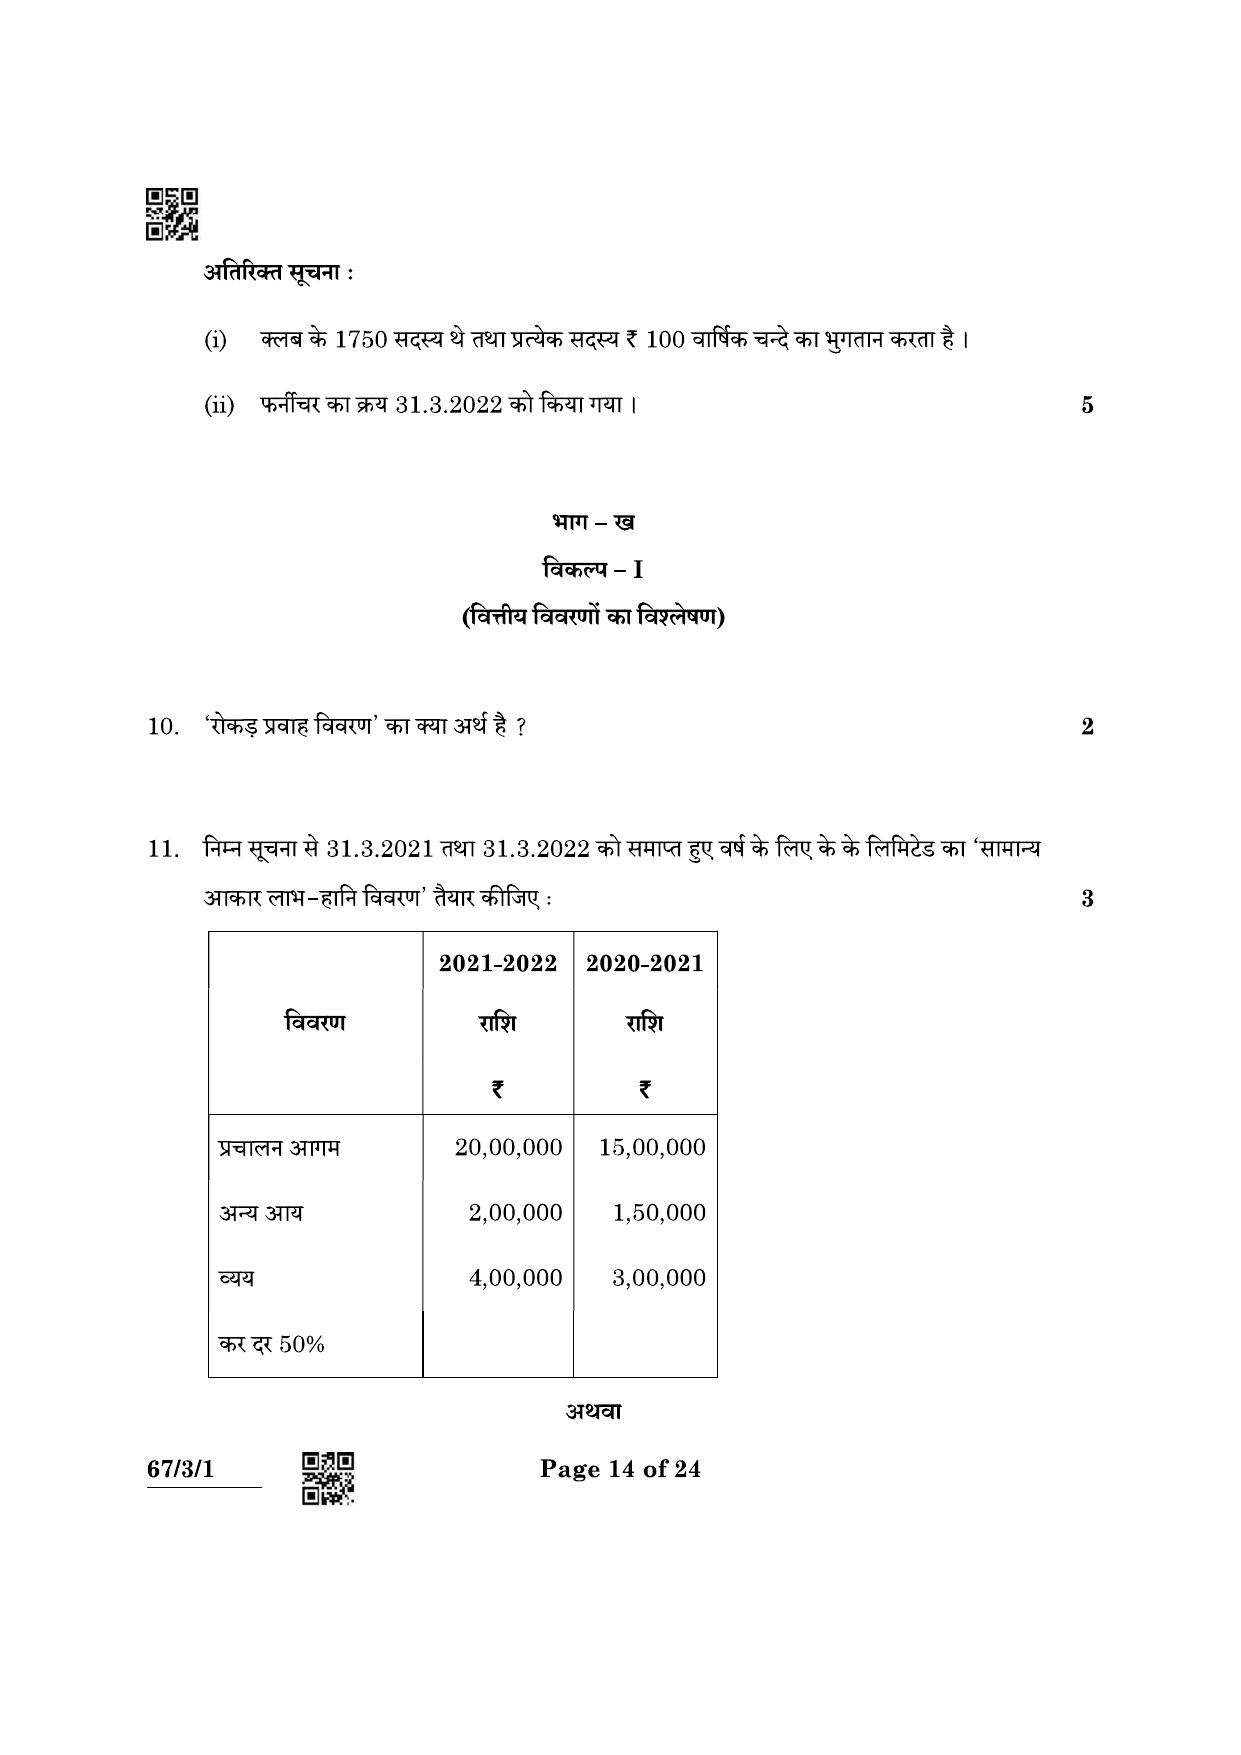 CBSE Class 12 67-3-1 Accountancy 2022 Question Paper - Page 14